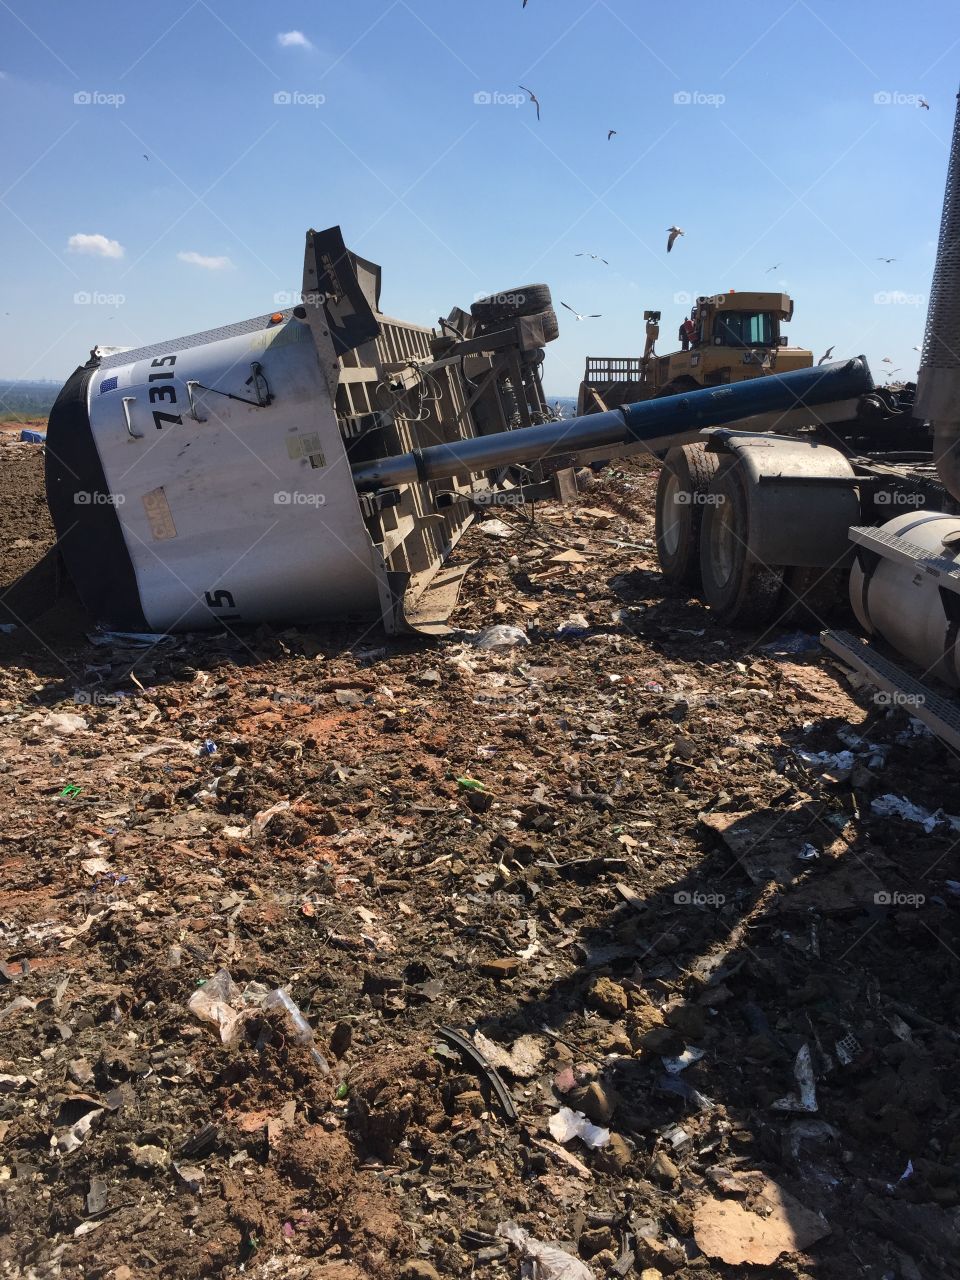 Republic Services tractor trailer in McCarty Landfill with a rolled over trailer 